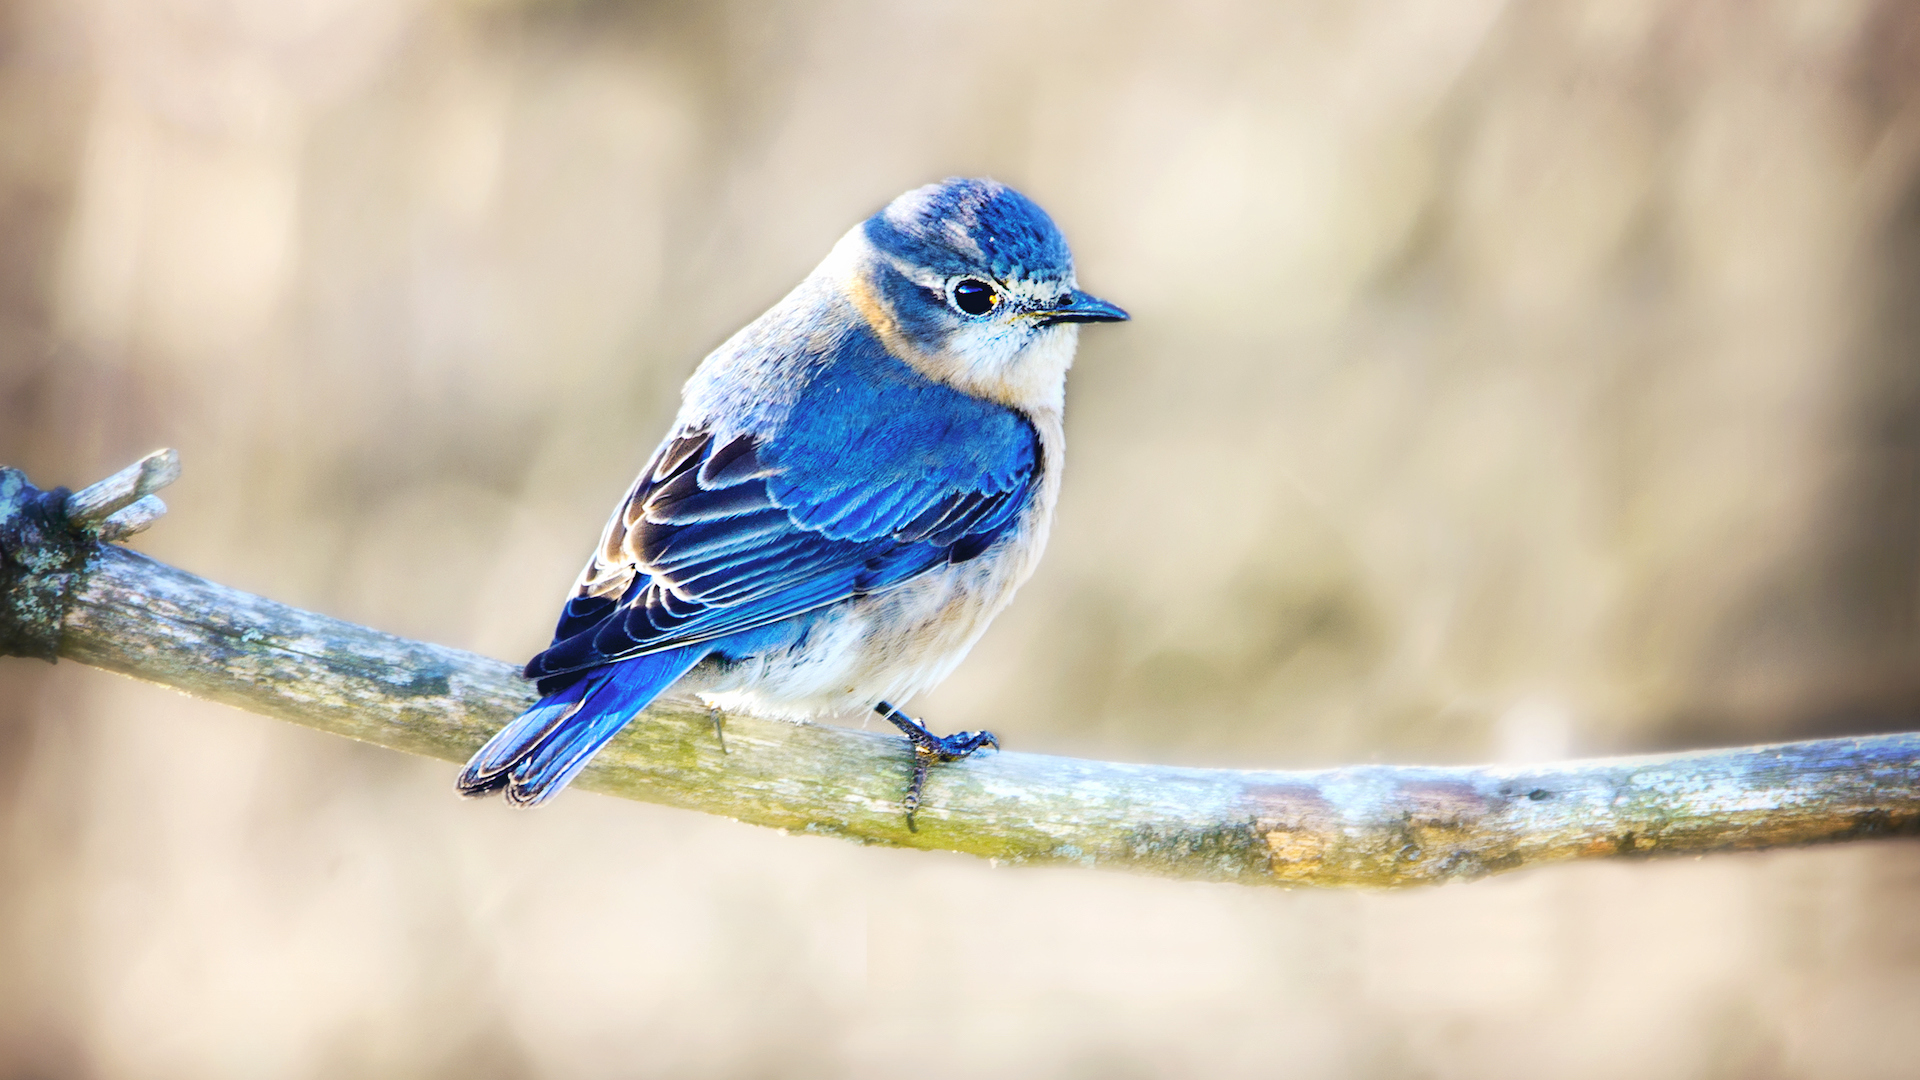 A photograph of a male bluebird perched on a branch